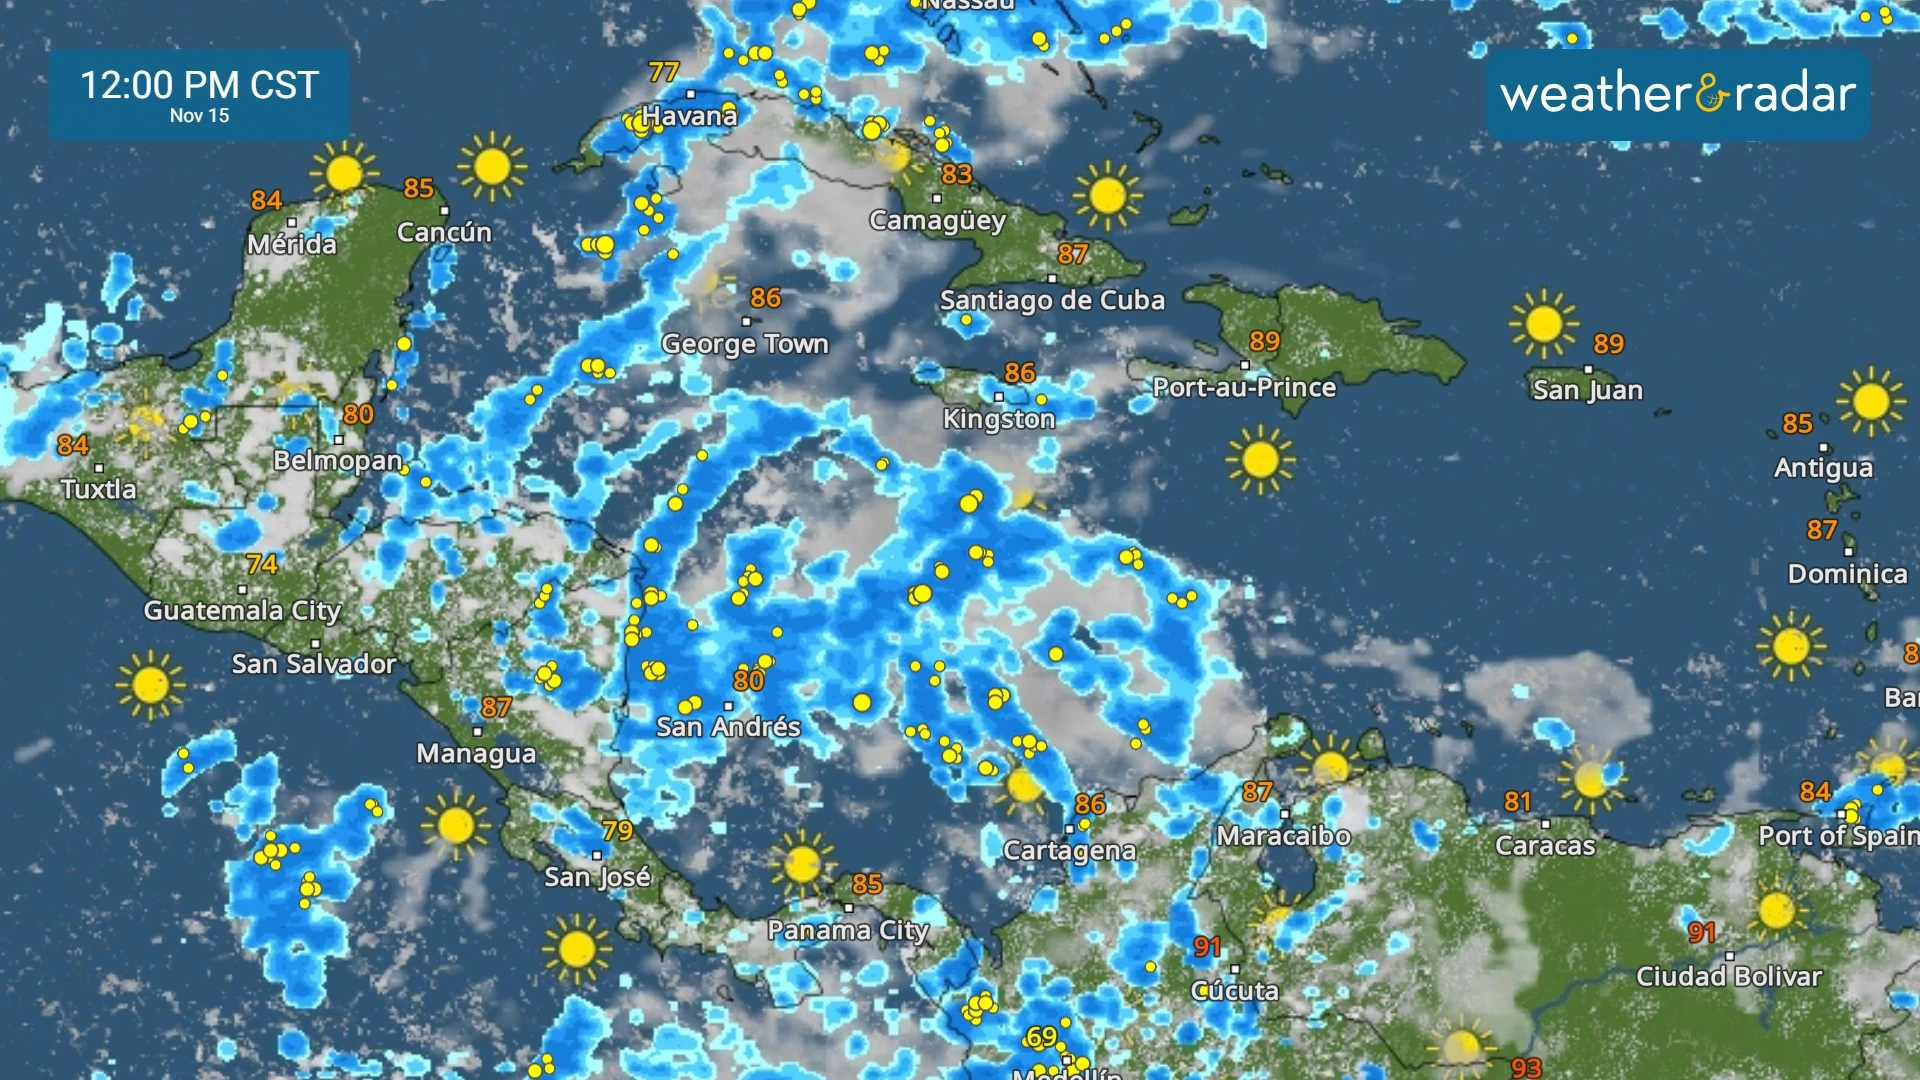 Broad area of low pressure is bringing and will continue to bring lots of rain to Central America & to the Caribbean. 